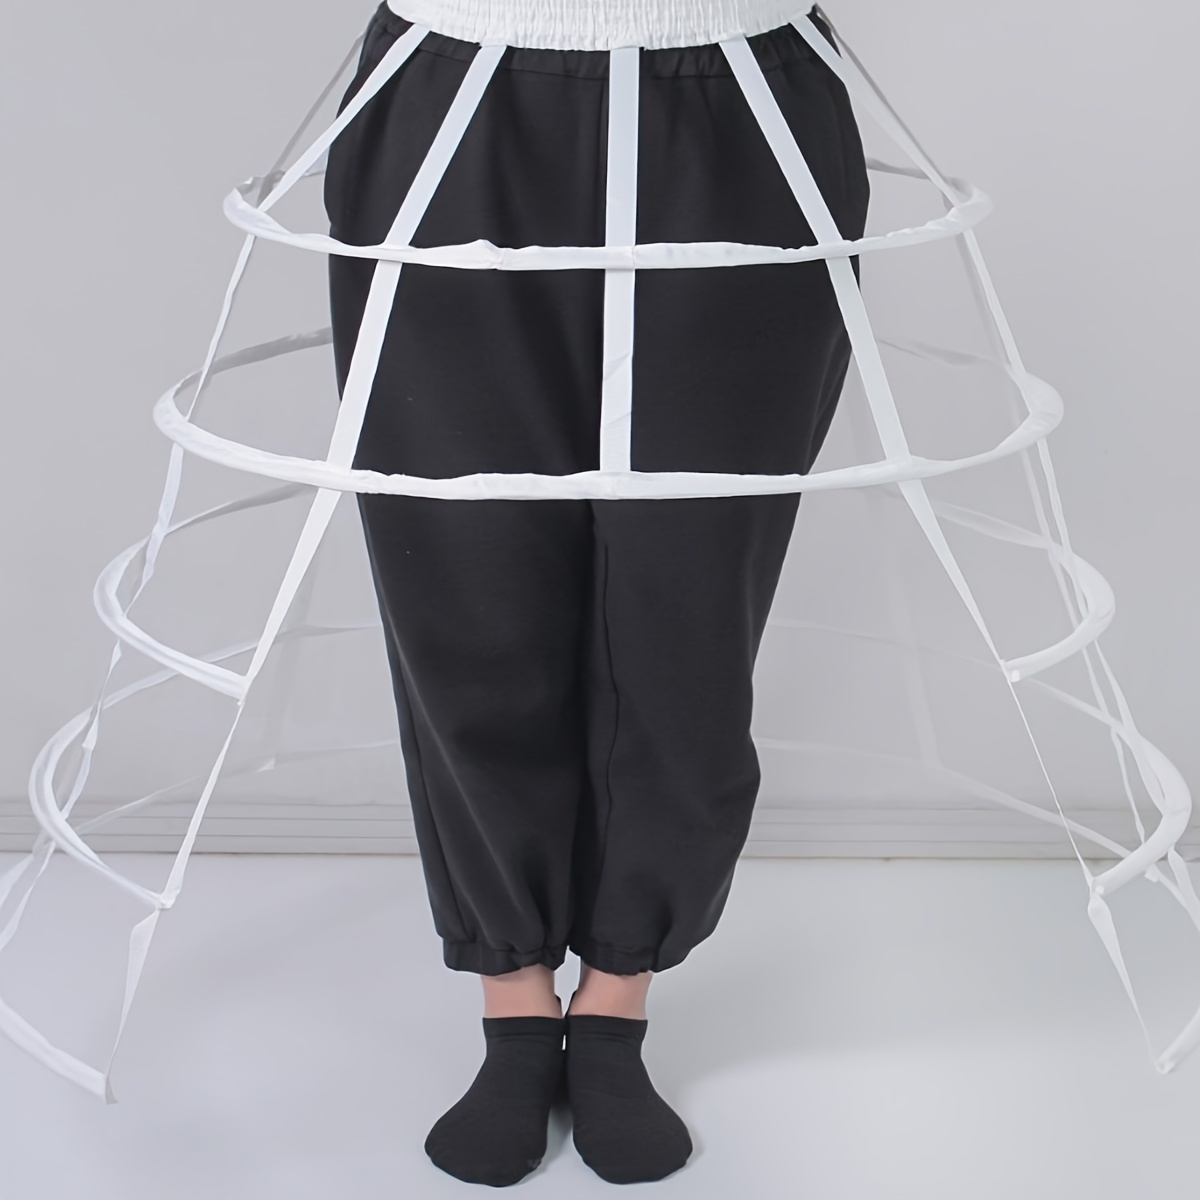 1pc petticoat victorian bustle cages hoop skirt cage skirt for women